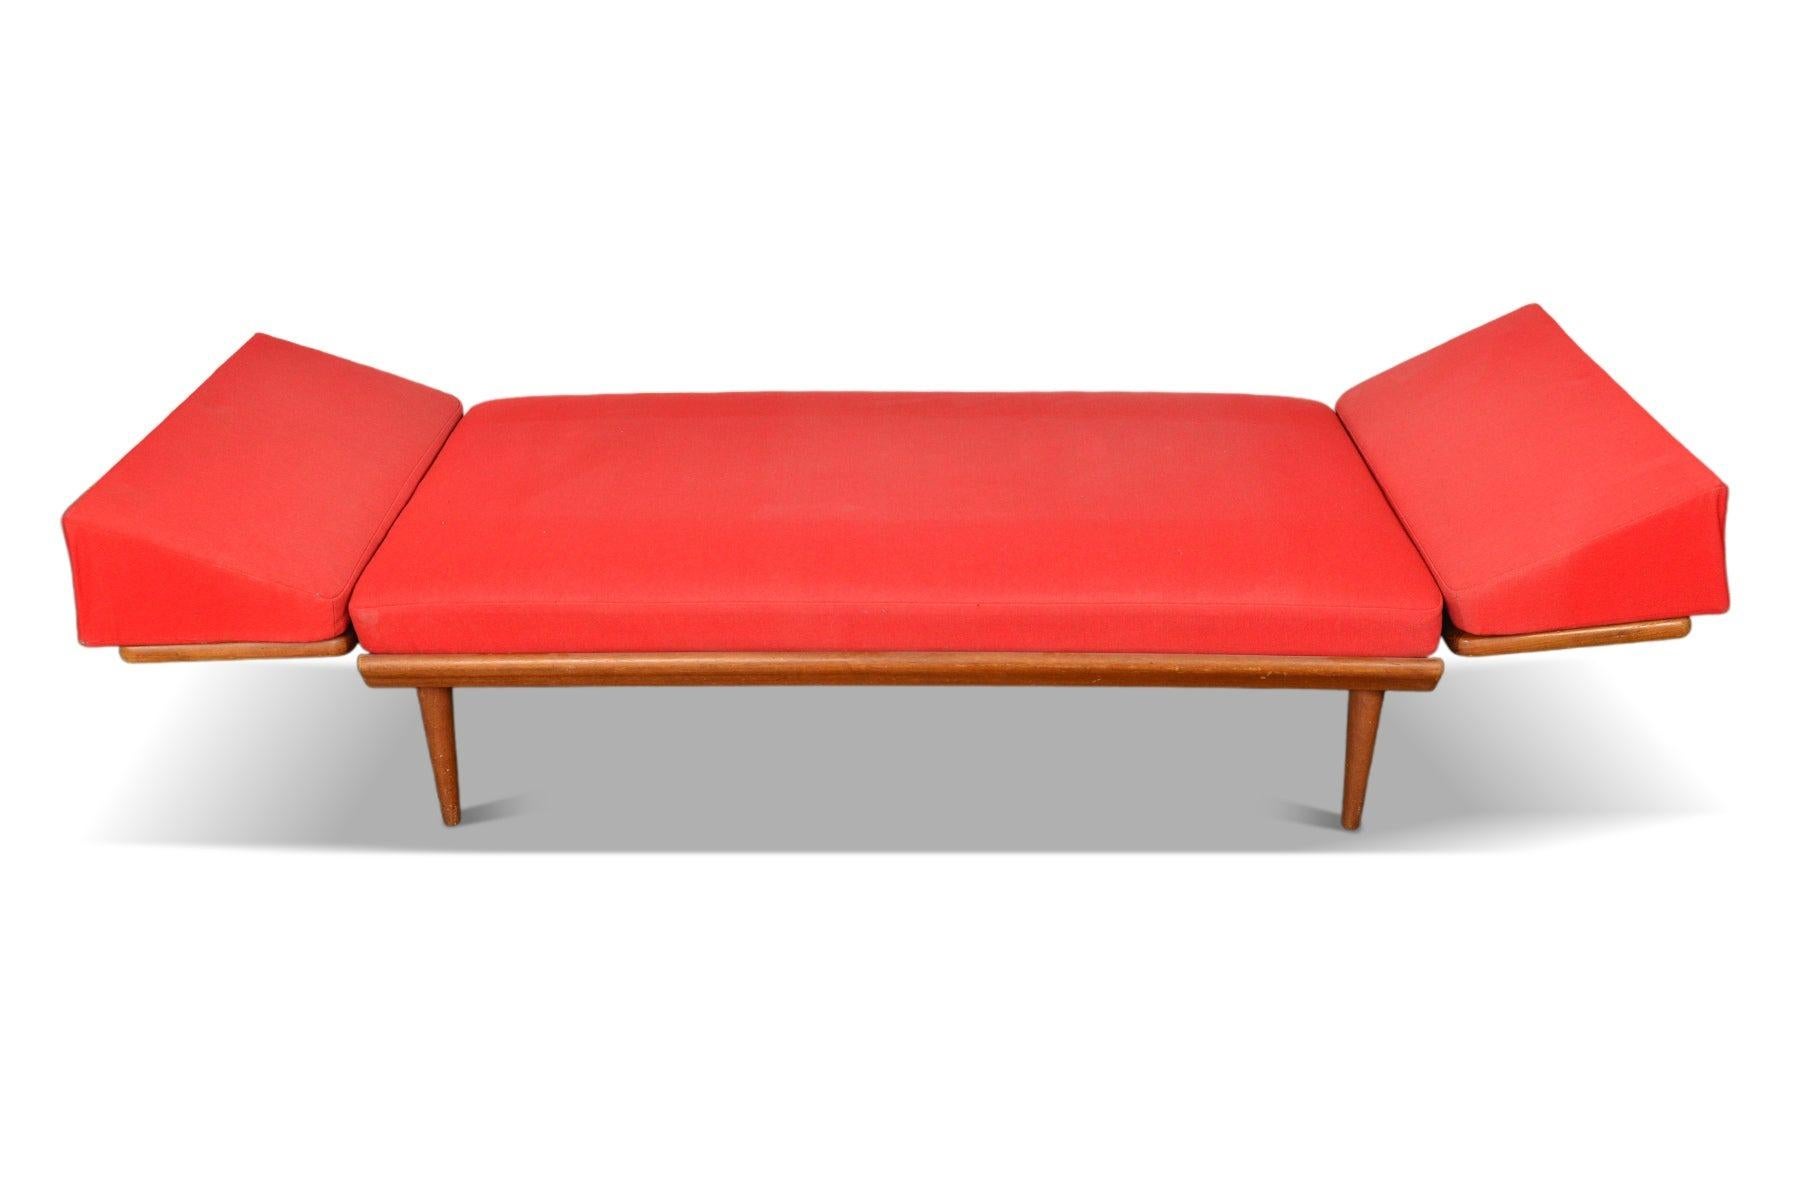 Teak + Cane Loveseat / Daybed By Peter Hvidt In Excellent Condition For Sale In Berkeley, CA